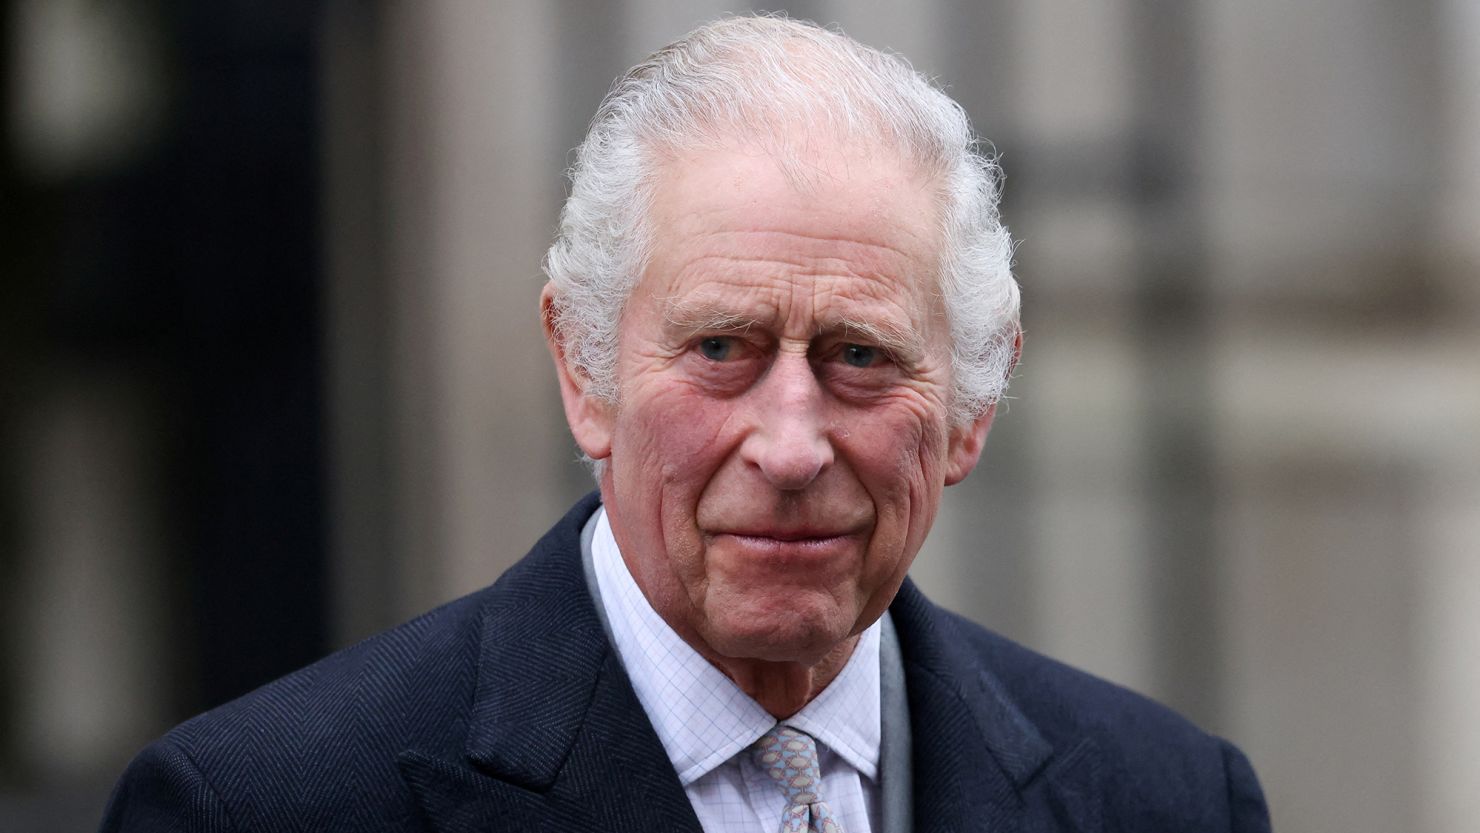 Britain's King Charles III spent three nights at the London Clinic after receiving treatment for an enlarged prostate. He was discharged on January 29 hours after the Princess of Wales left the hospital following her own treatment.